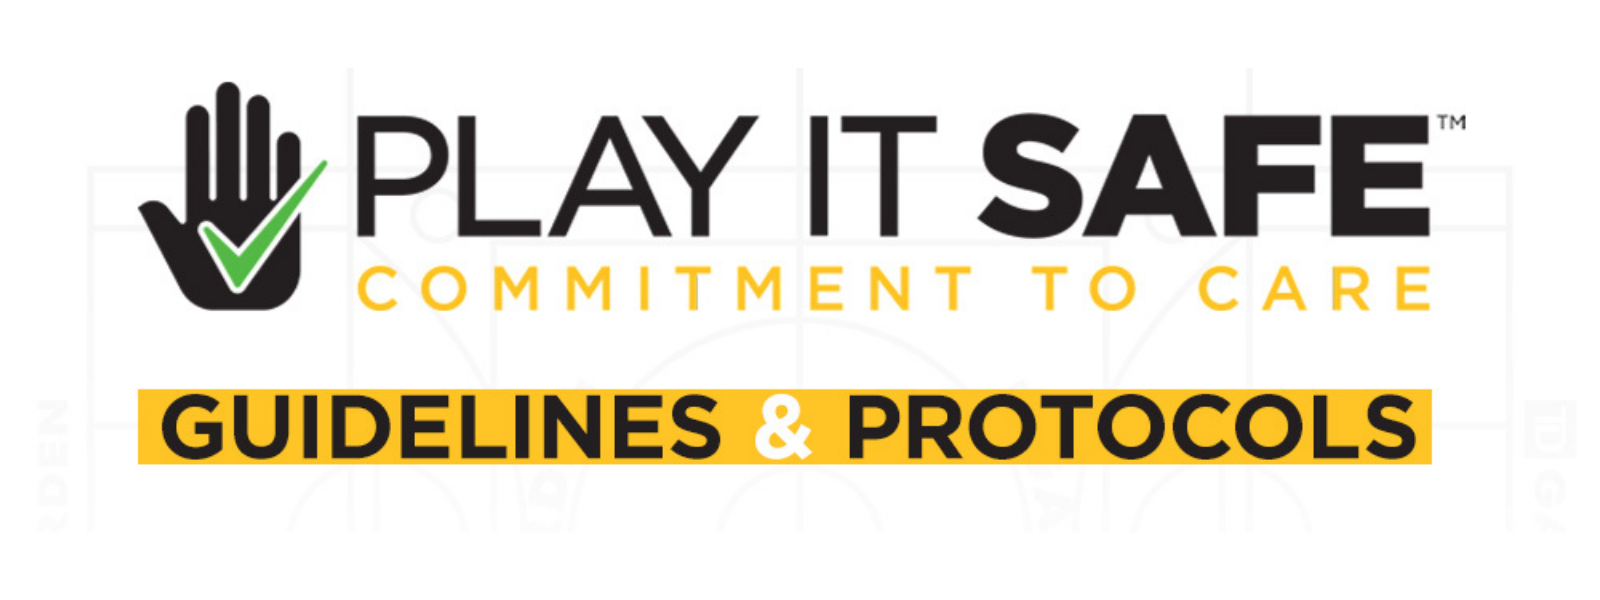 Play It Safe: Commitment to Care. Guidelines & Protocals